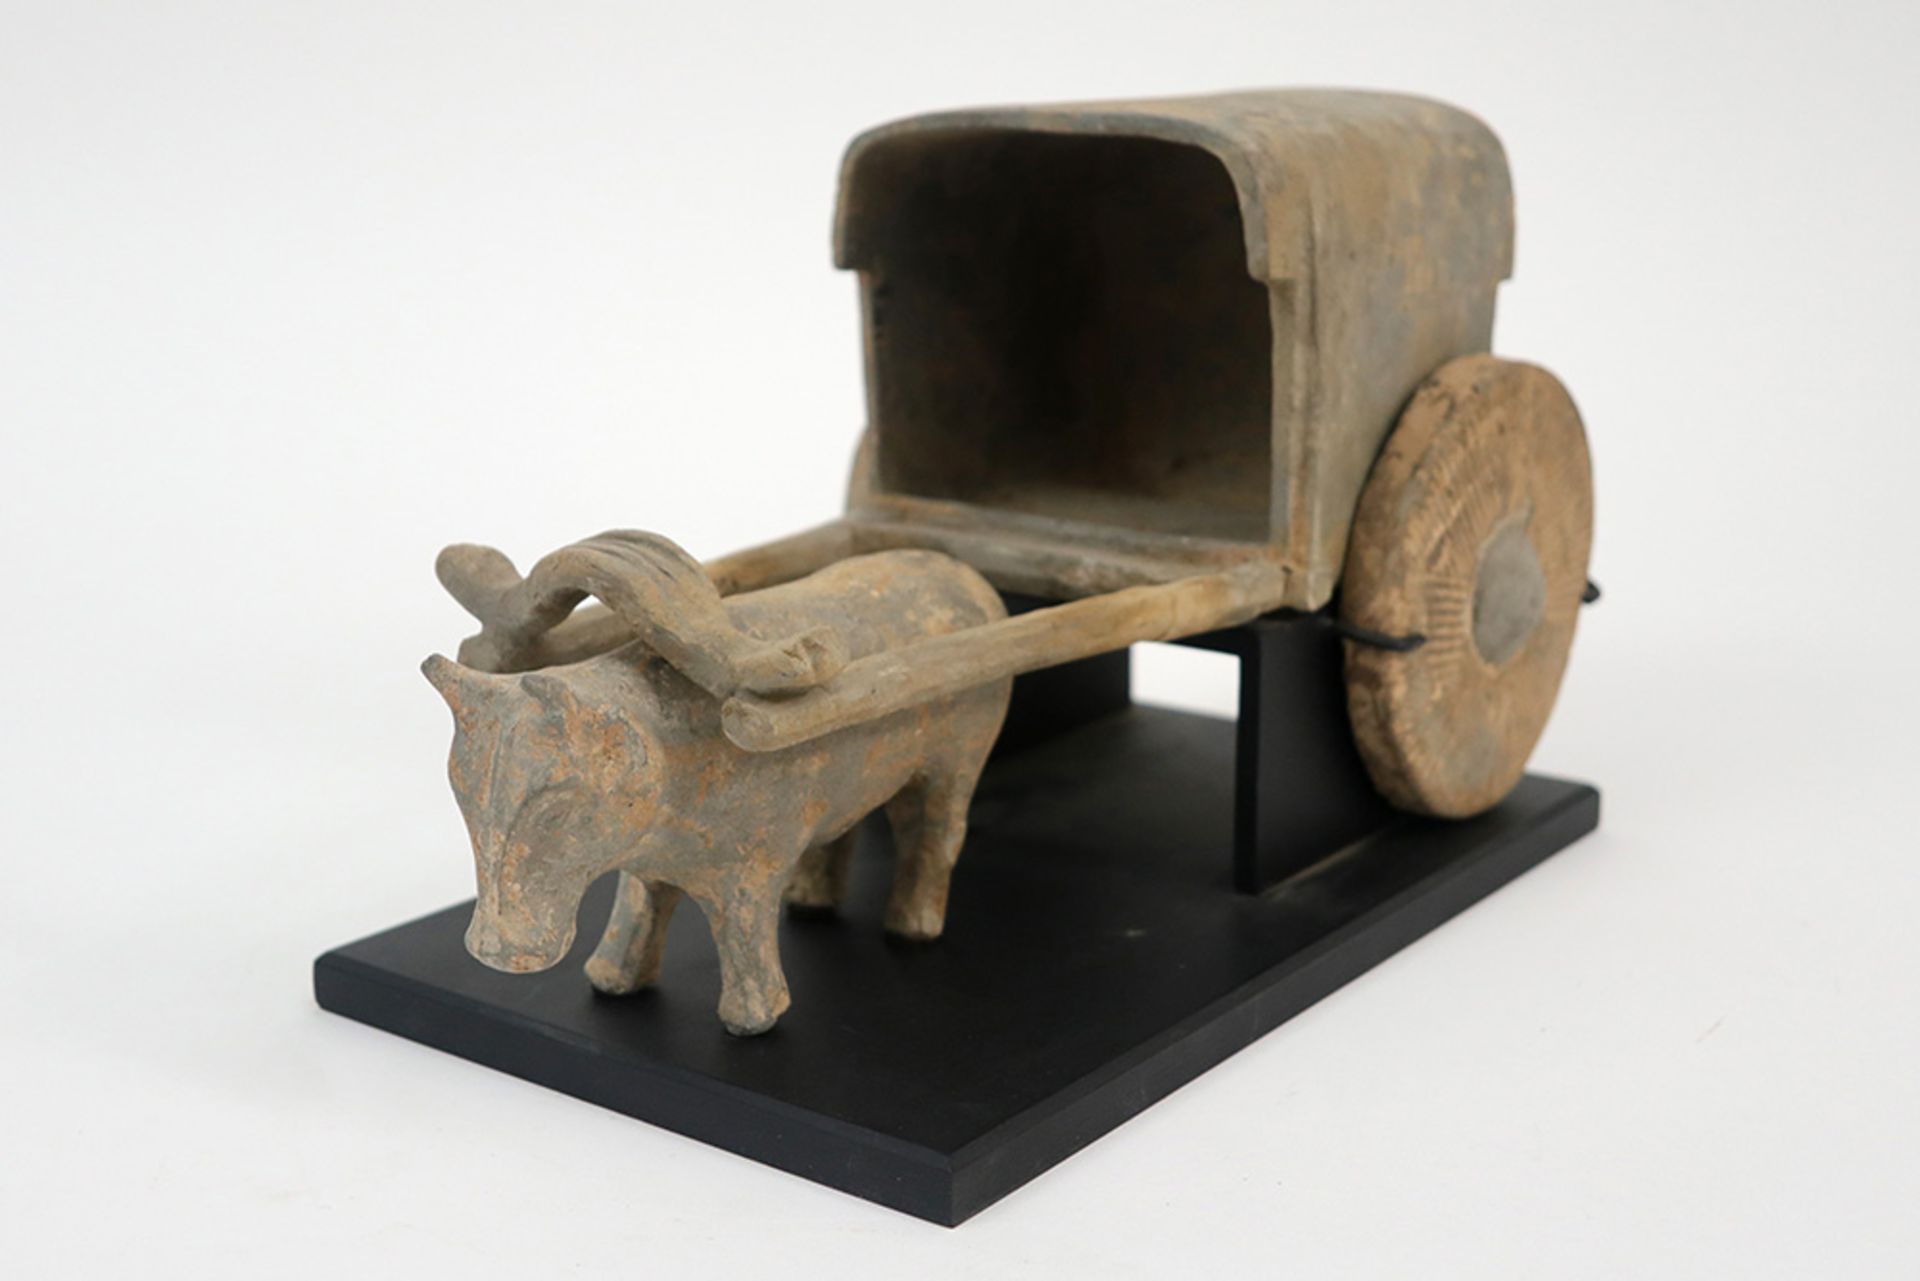 Chinese Han period tomb find : a sculpture in earthenware depicting a carriage with two wheels - Bild 6 aus 6